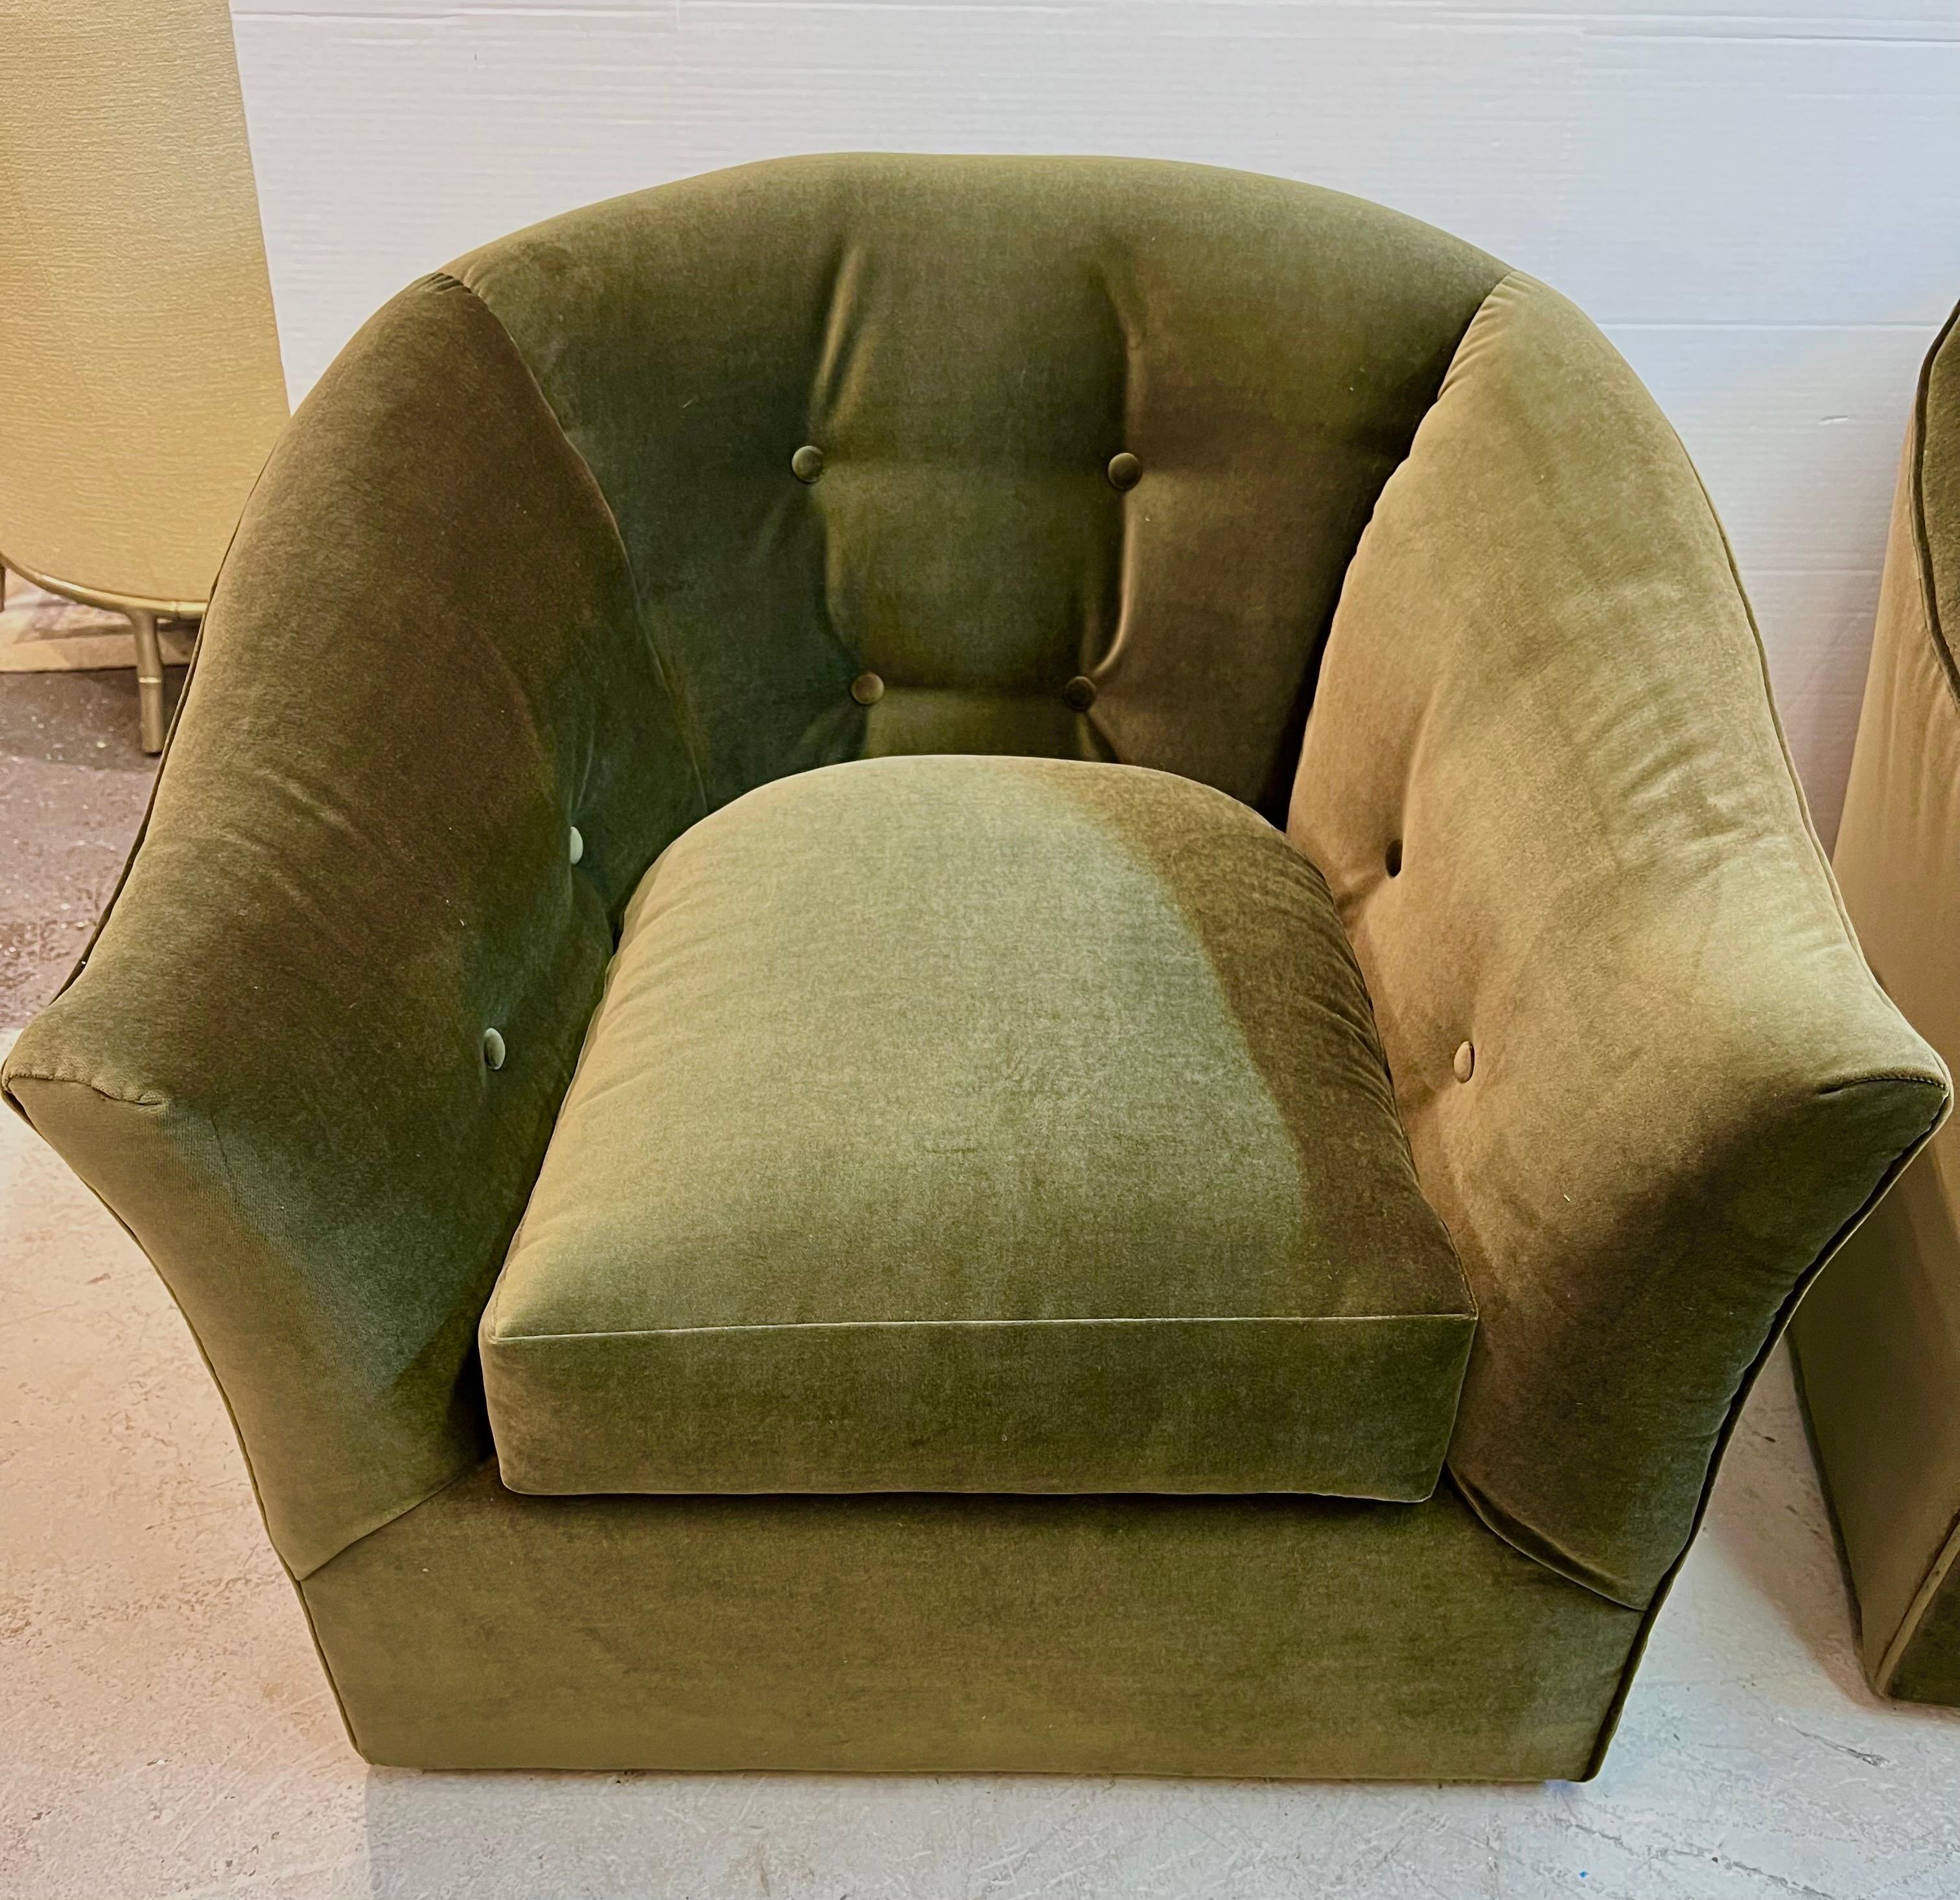 Magnificent pair of newly reupholstered dark olive tufted club chairs. The fabric is a velvet mohair. Features 8 way hand tied construction and gorgeous lines. The scale is perfect for a larger home or apartment. Why not own the best?.